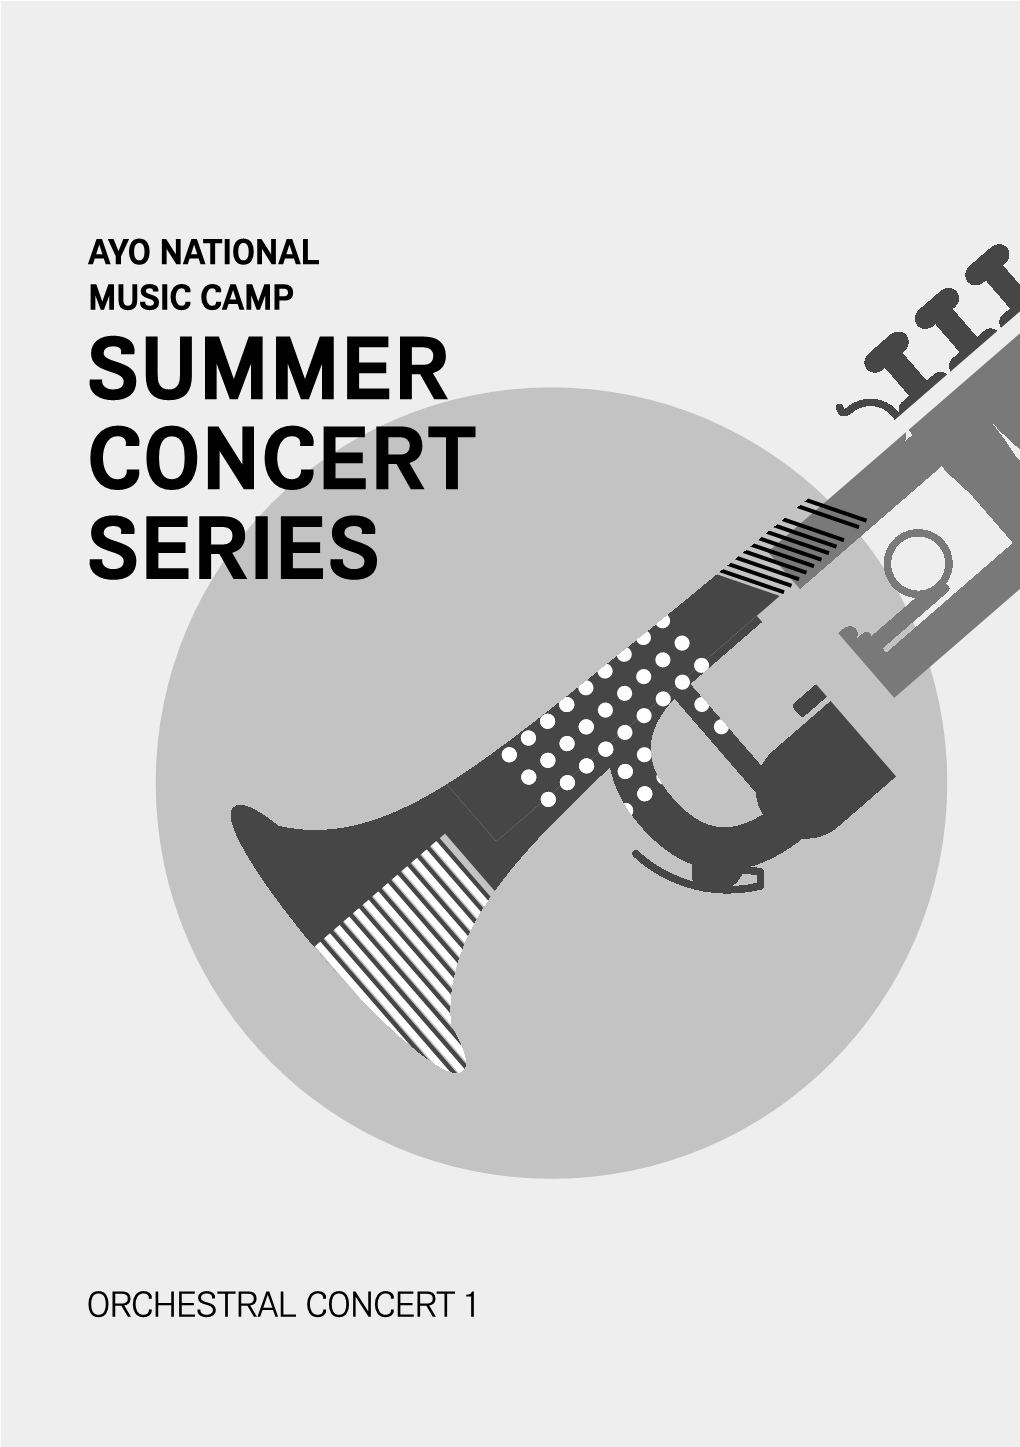 Ayo National Music Camp Summer Concert Series